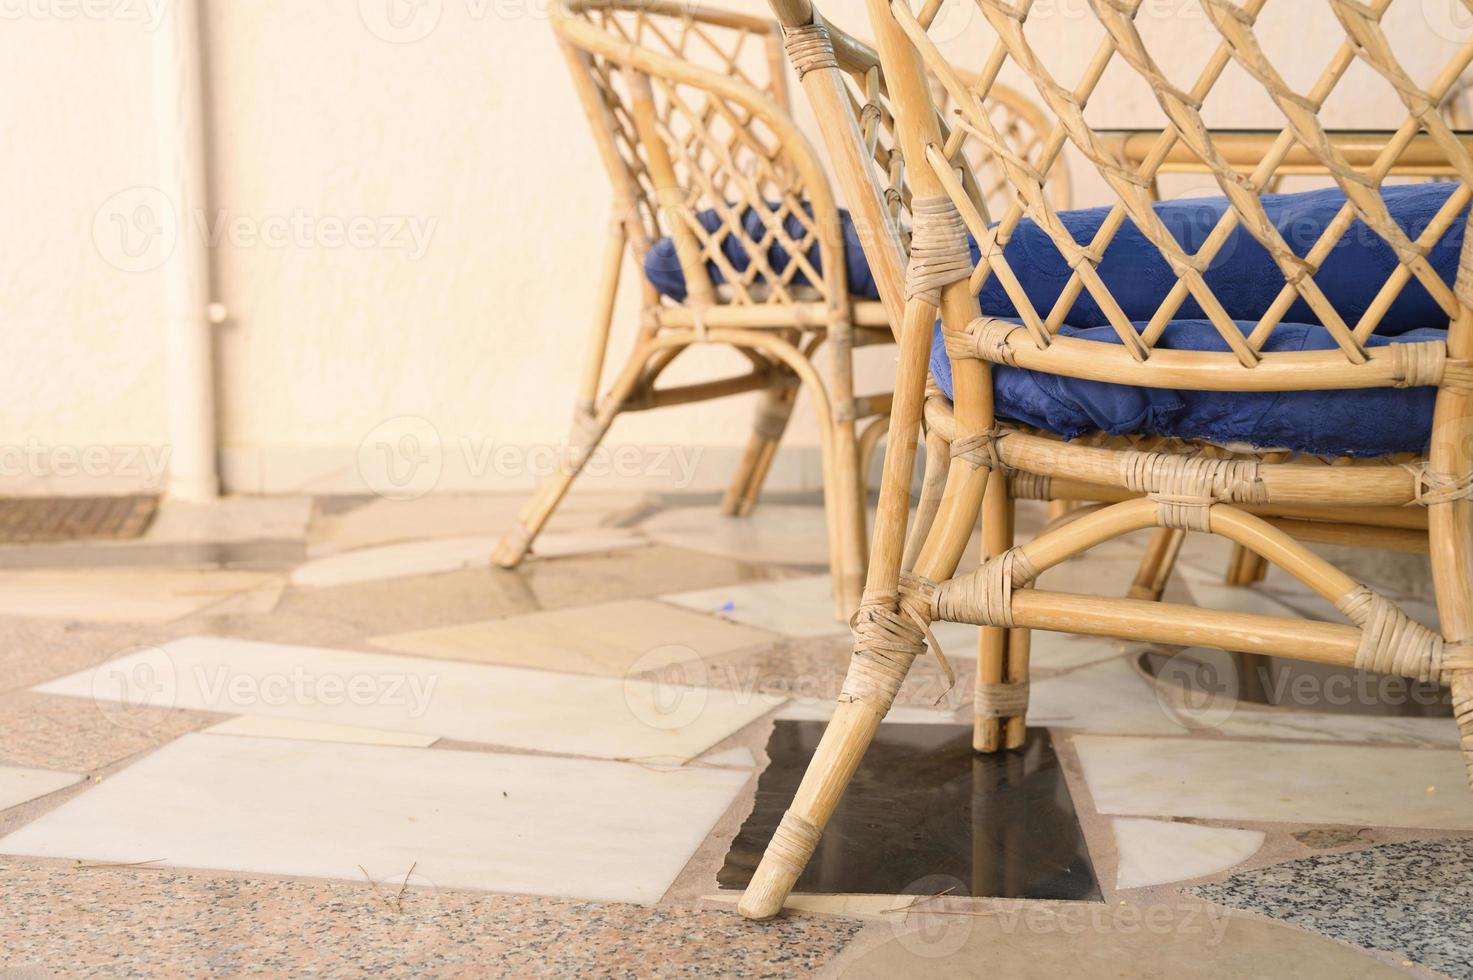 Wicker wooden chairs and coffee table for relaxing and socializing photo